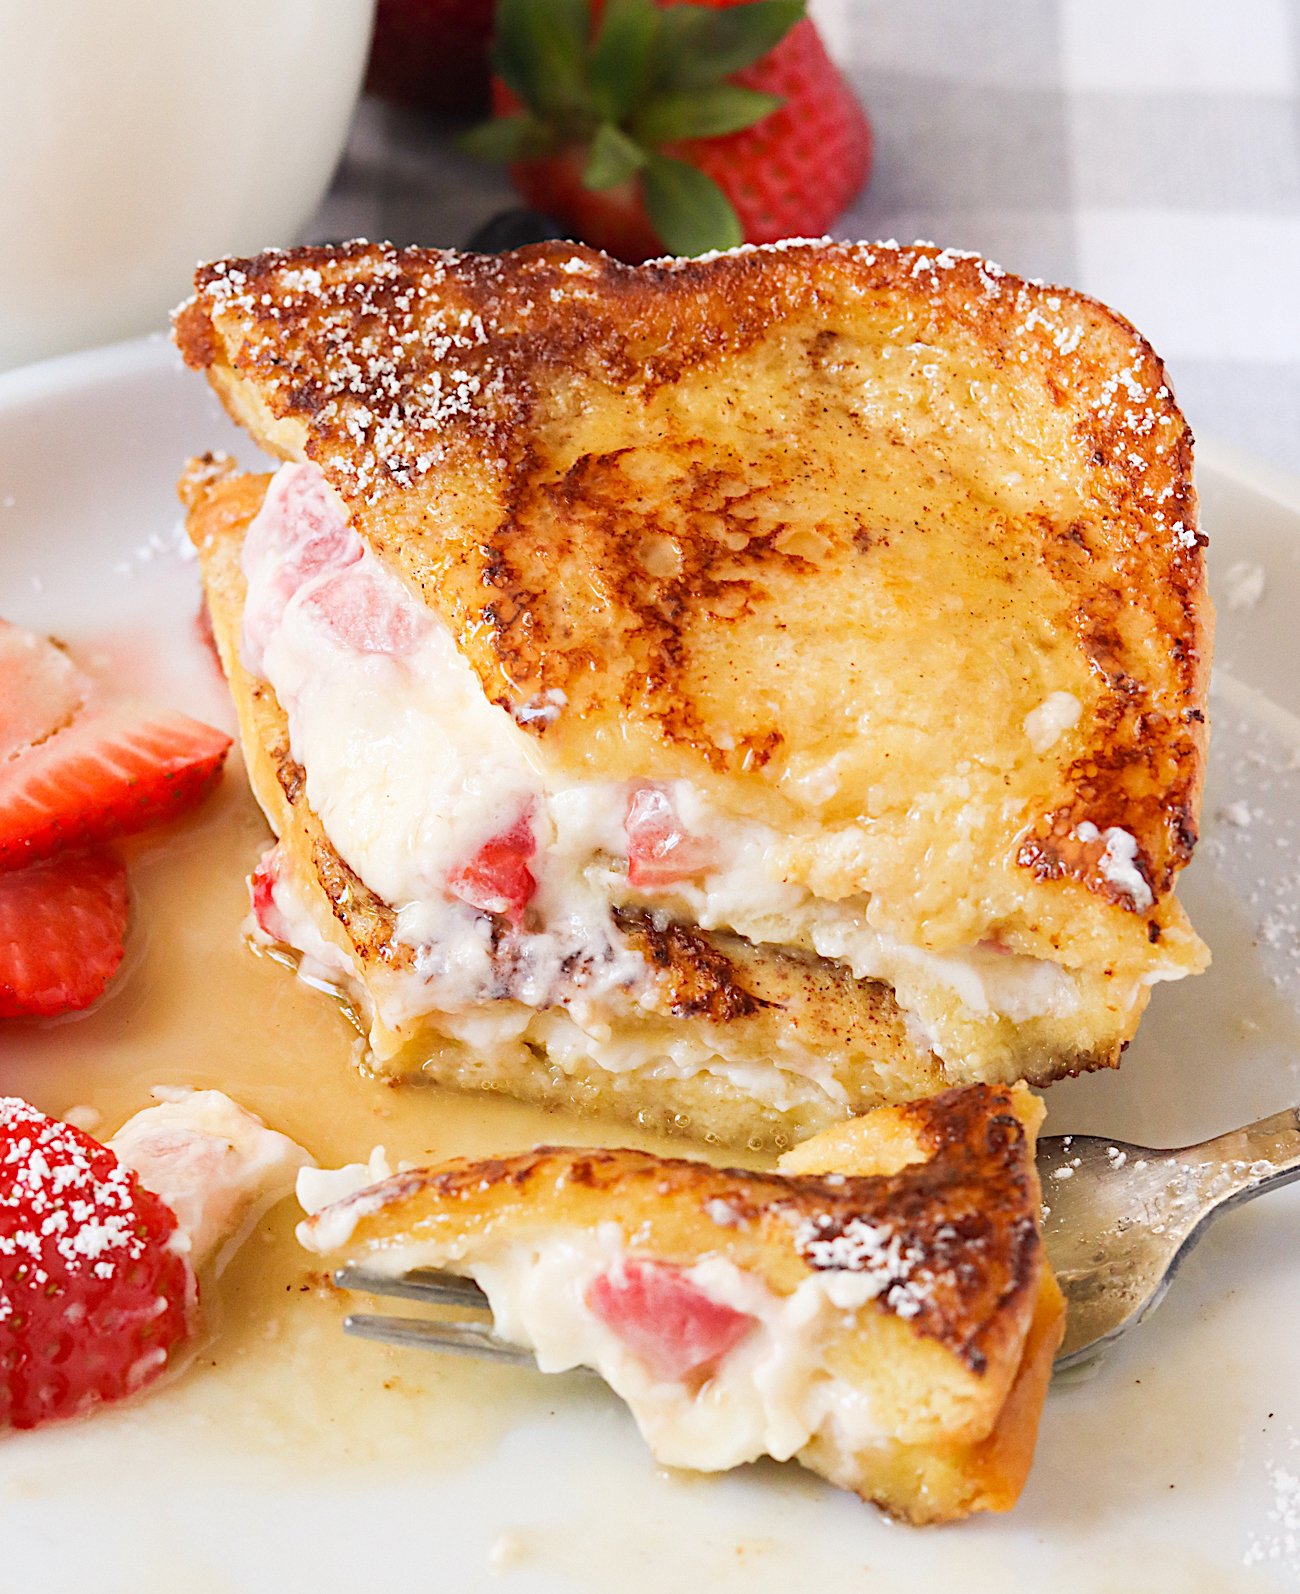 Bite into the insanely delicious stuffed French toast